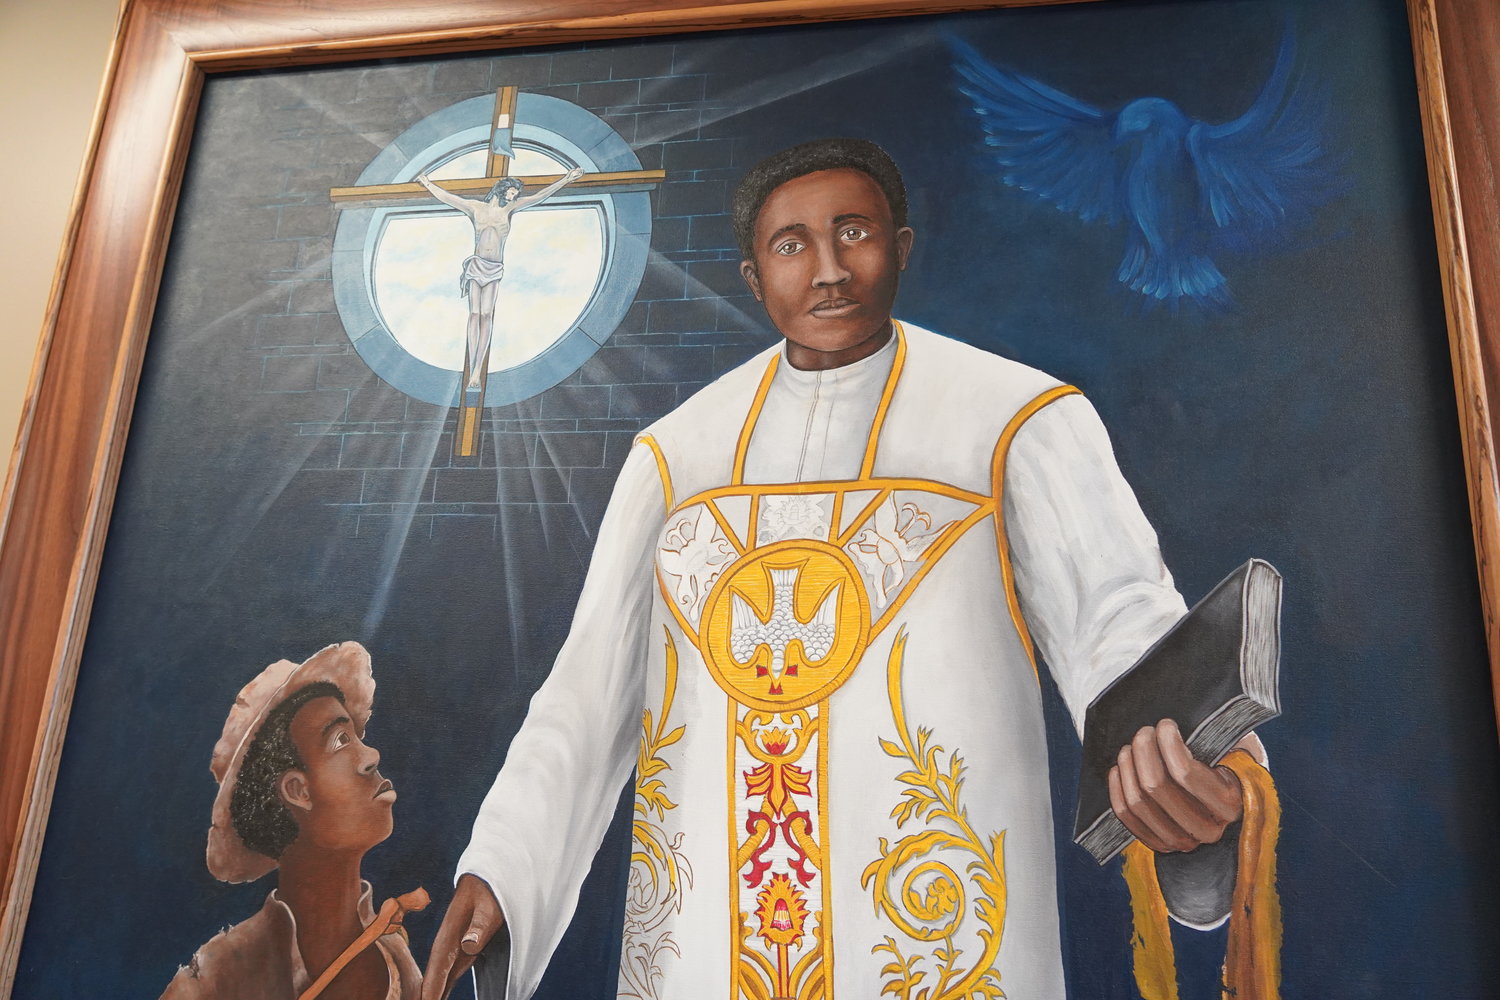 This new artwork, “The Light that Guides the Faithful" by Lonnie Carlos Tapia, was commissioned in honor of the 10th anniversary of Fr. Tolton Regional Catholic High School in Columbia.